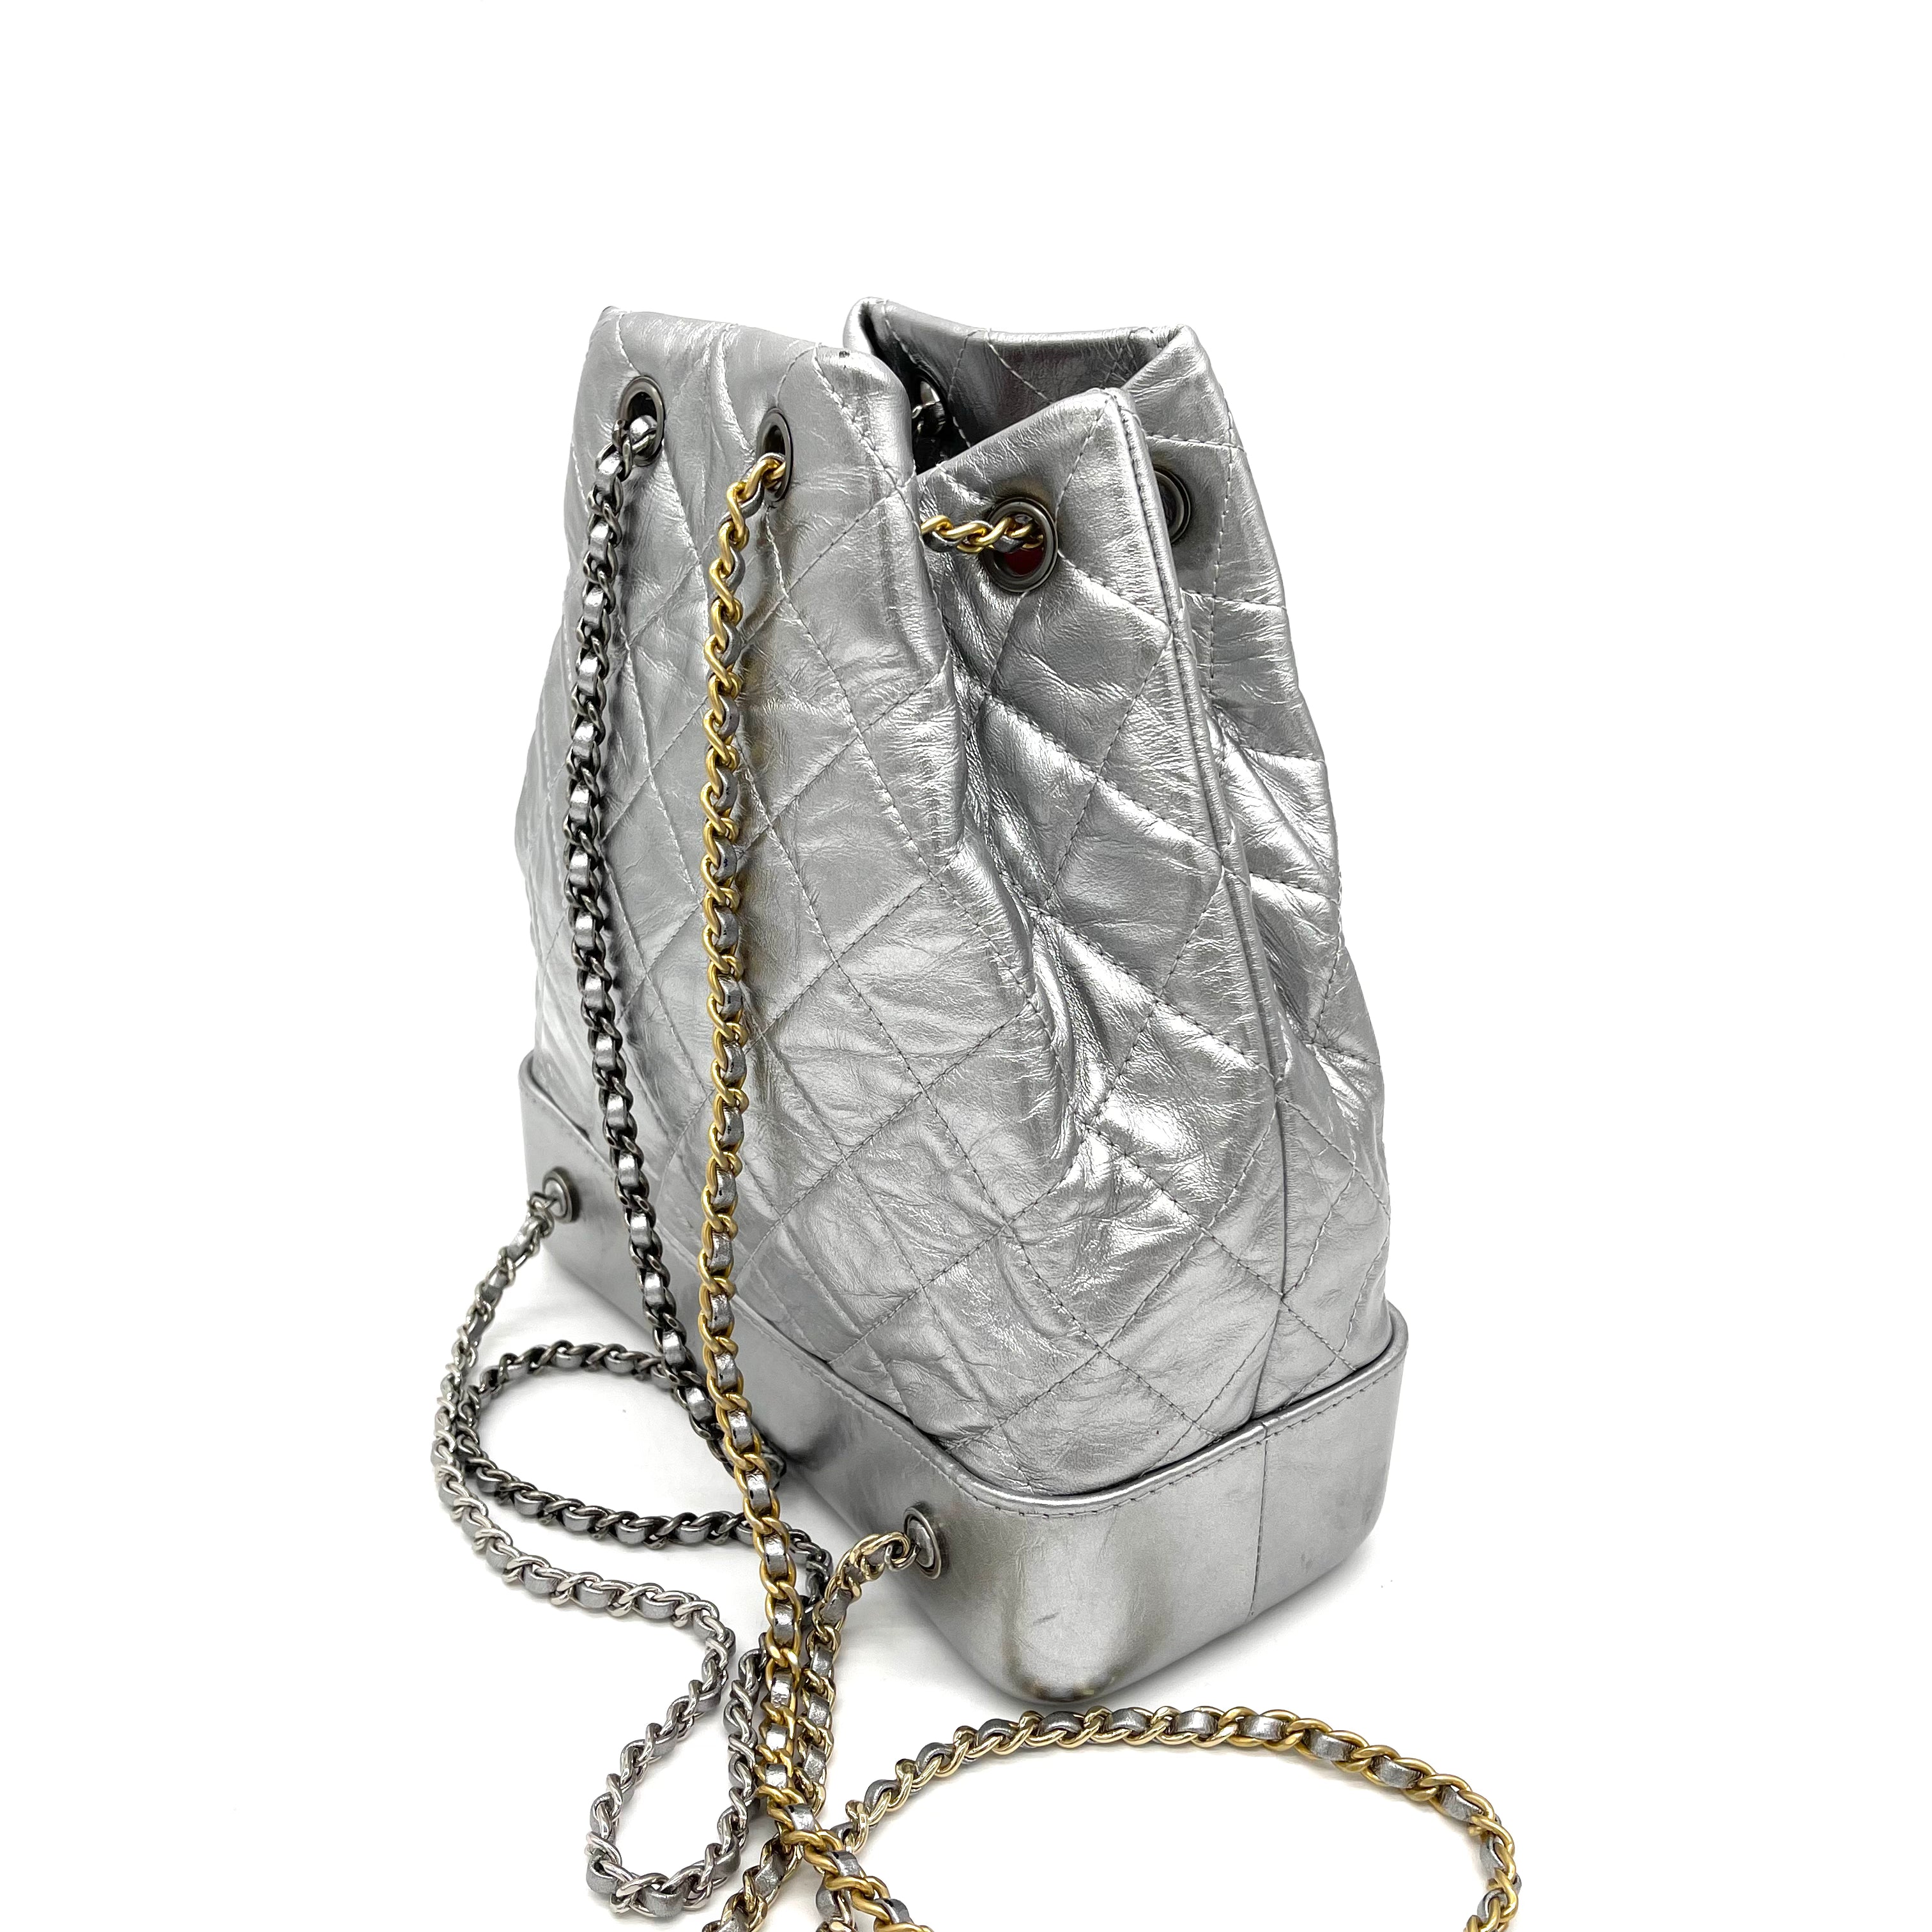 Chanel Gabrielle Backpack- Small size